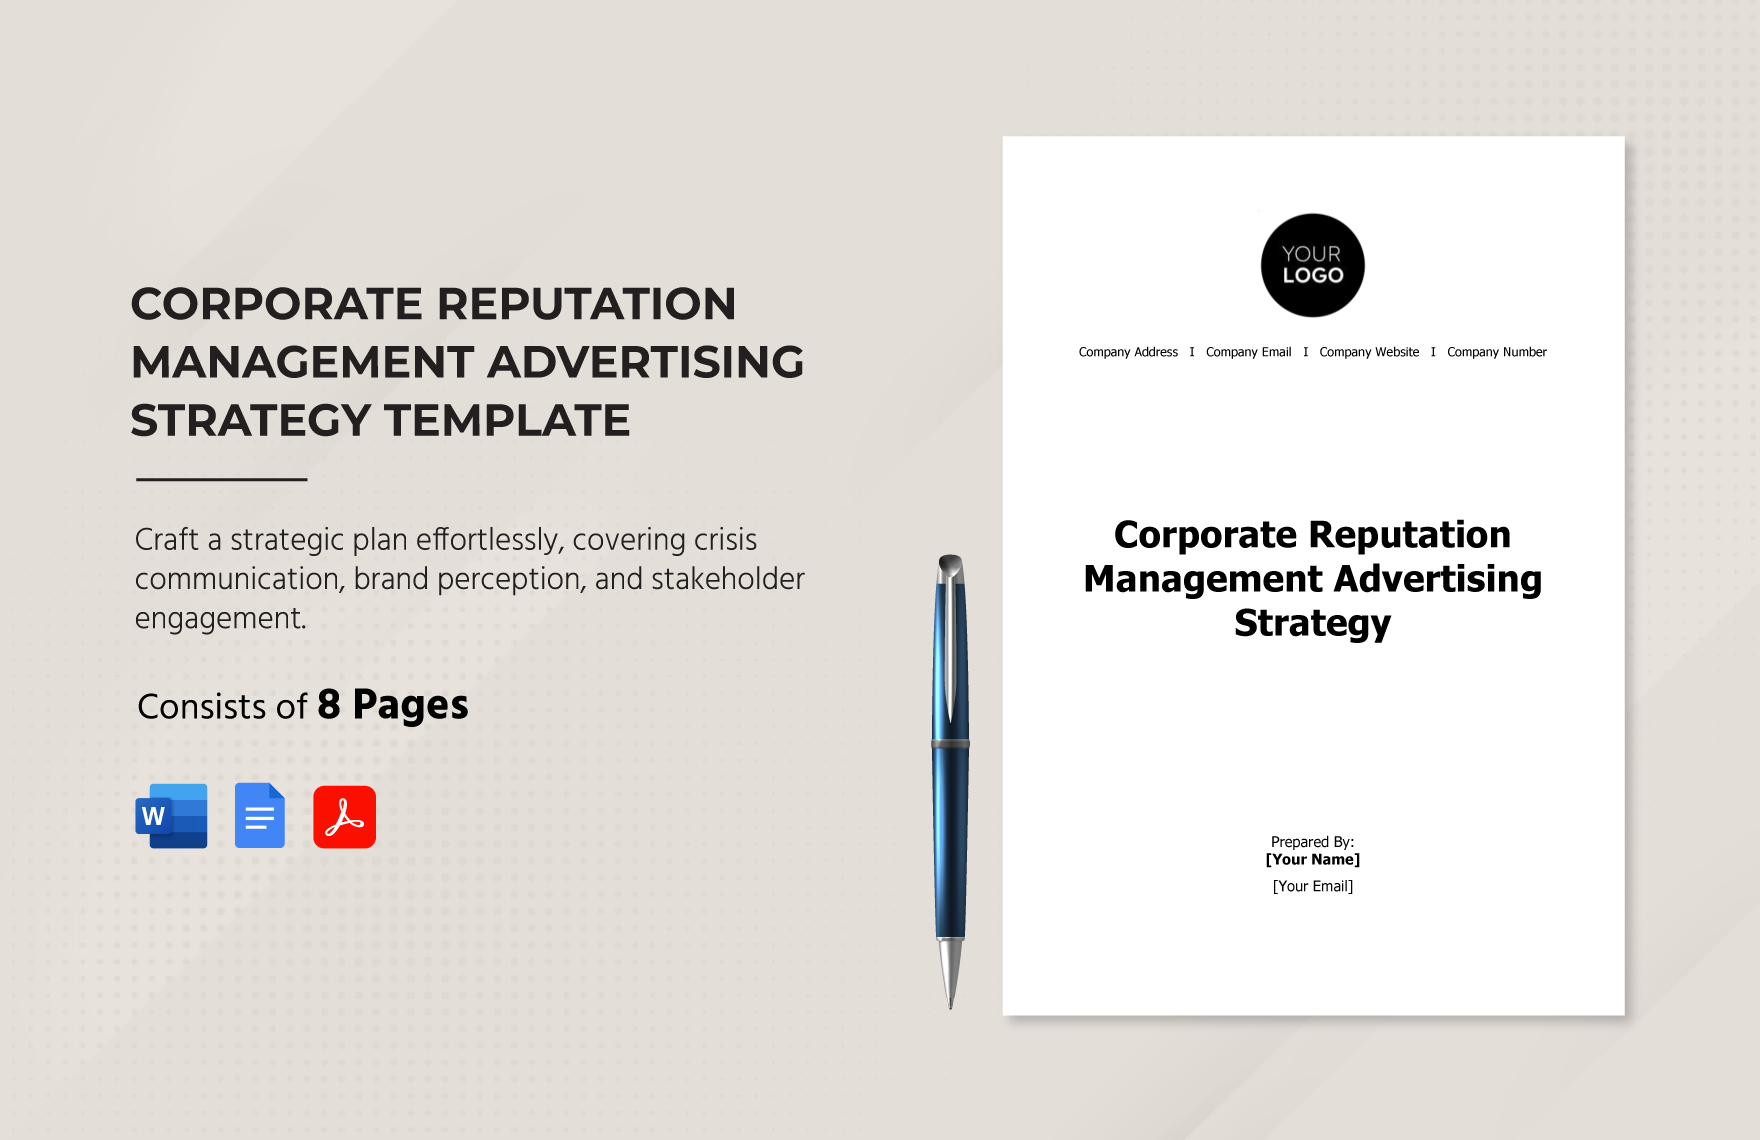 Corporate Reputation Management Advertising Strategy Template